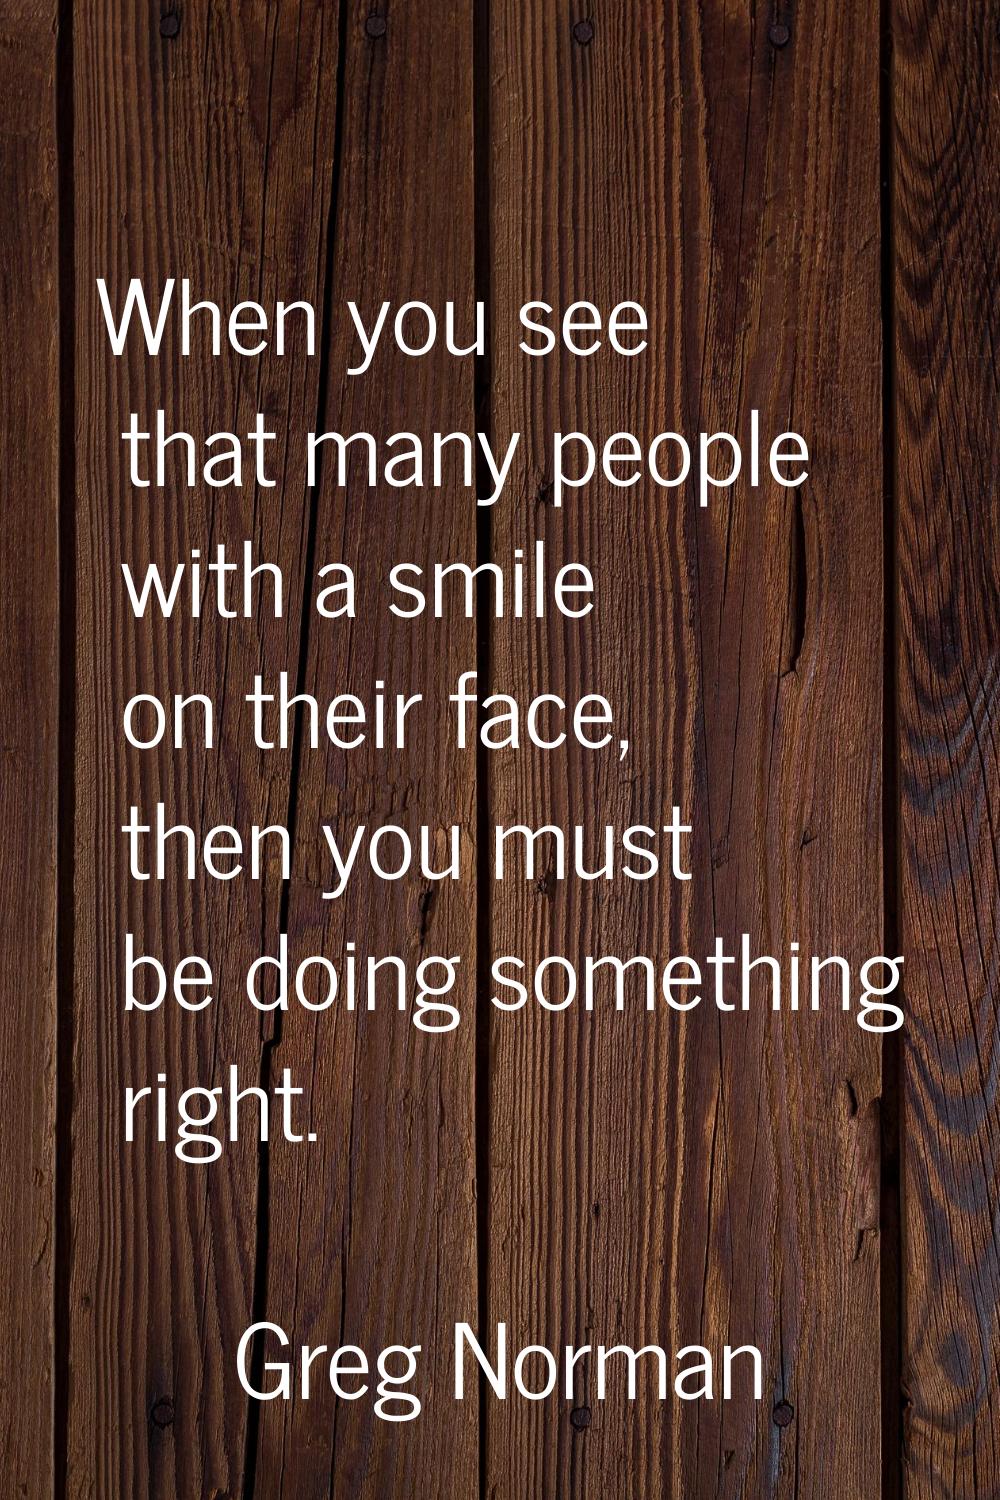 When you see that many people with a smile on their face, then you must be doing something right.